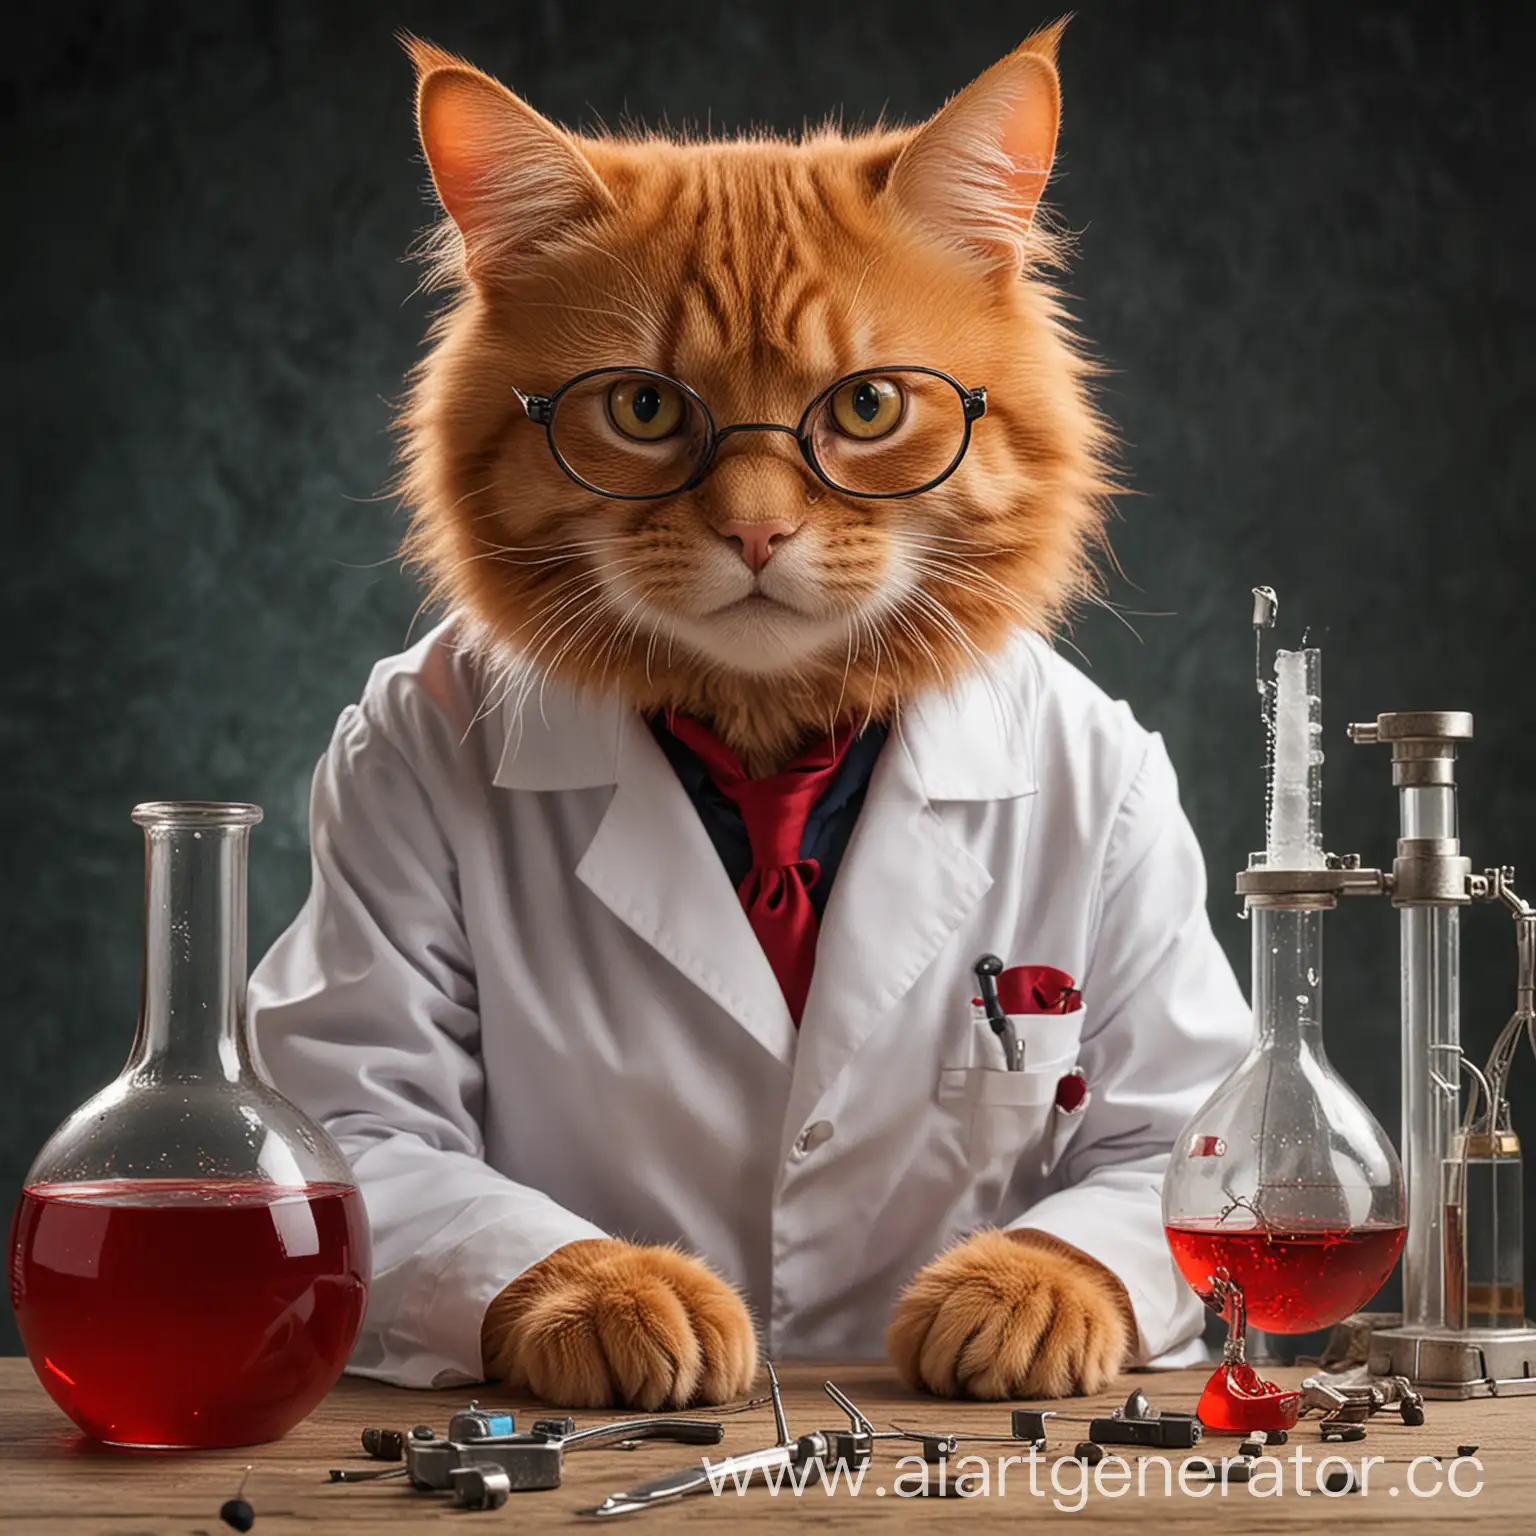 Red-Cat-Scientist-Conducting-Experiments-in-Laboratory-Setting